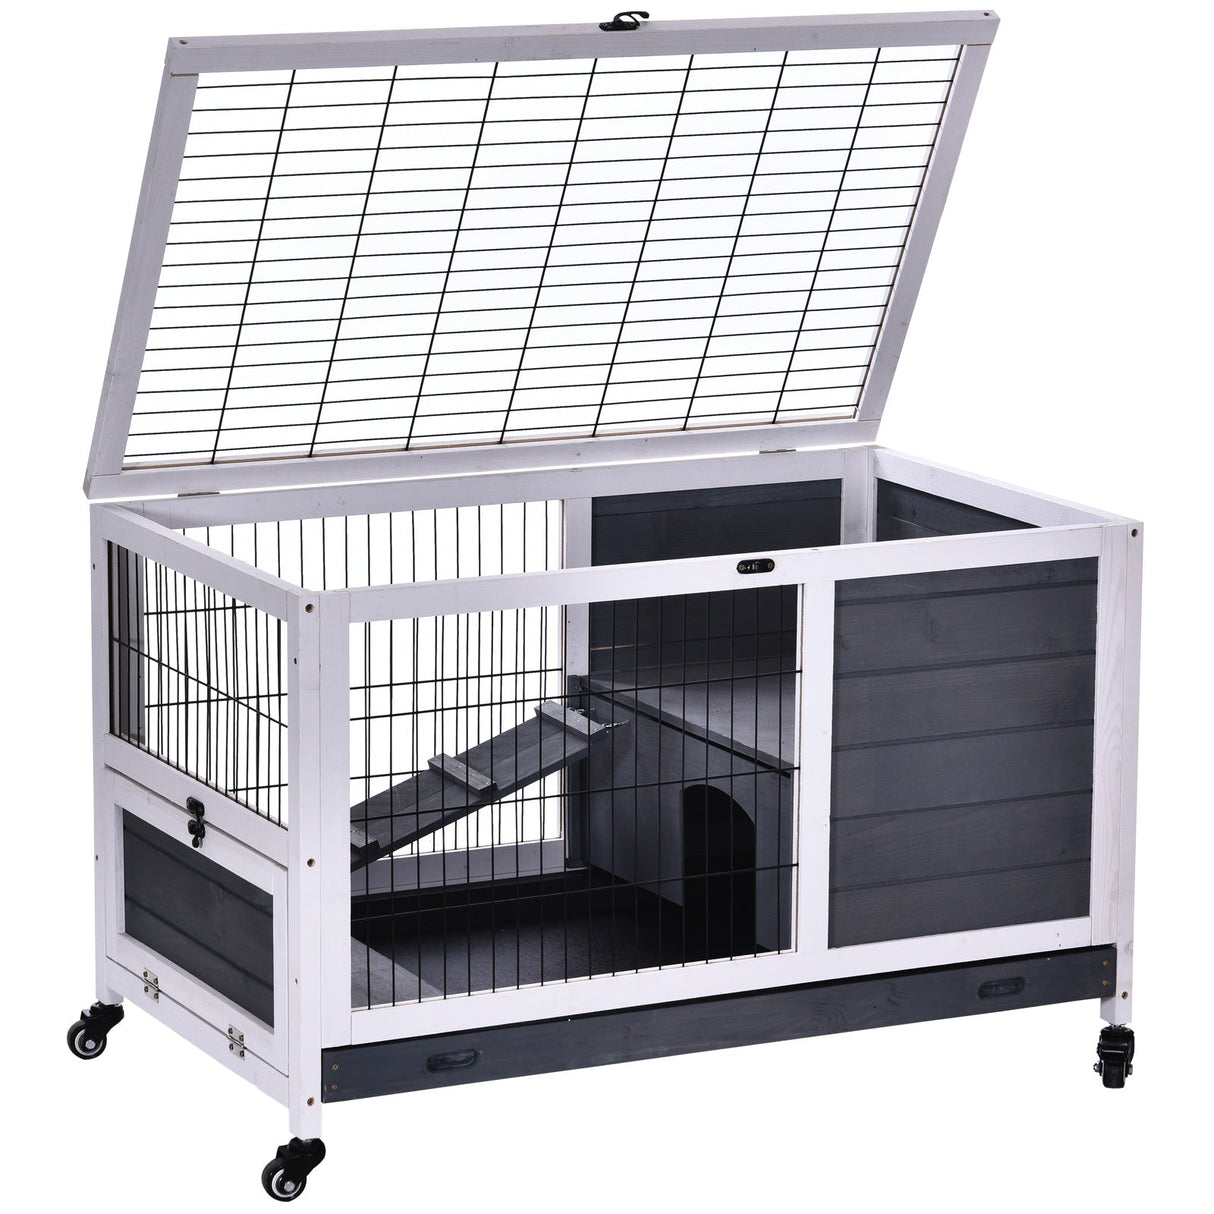 Wooden Rabbit Hutch Portable Indoor Guinea Pigs House Bunny Small Animal Cage Openable Roof Enclosed Run 90 x 53 x 59 cm, PawHut,